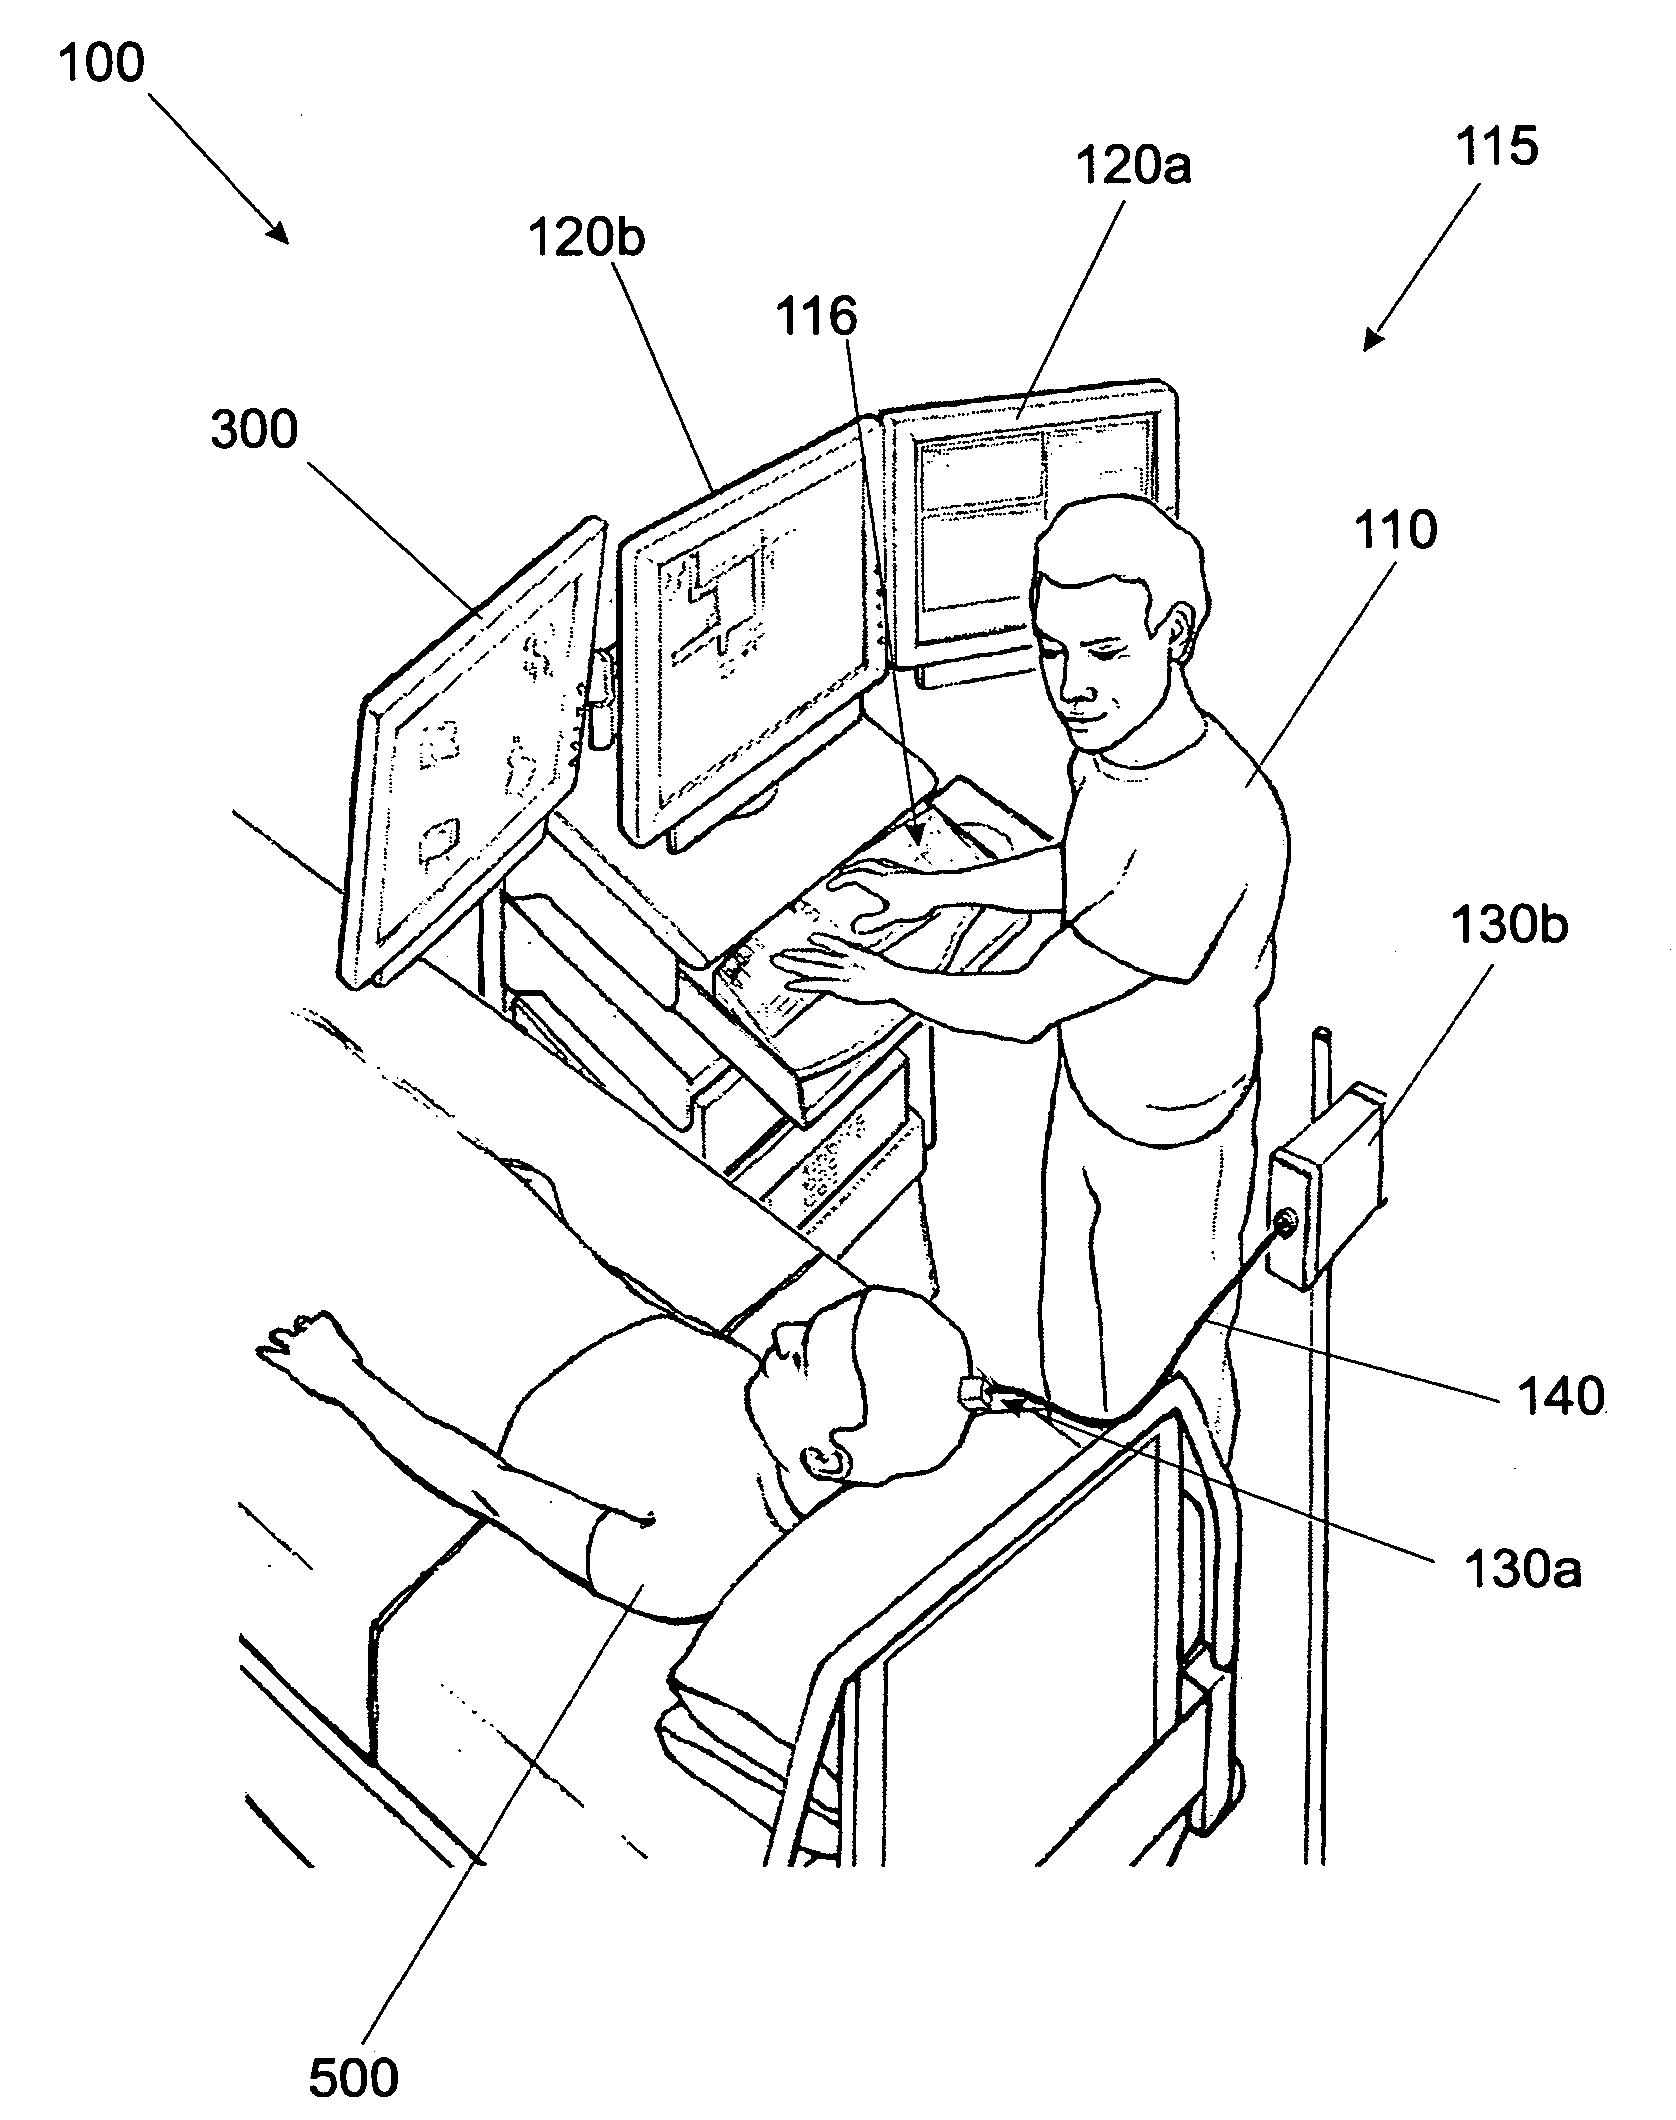 Neural interface system with embedded id